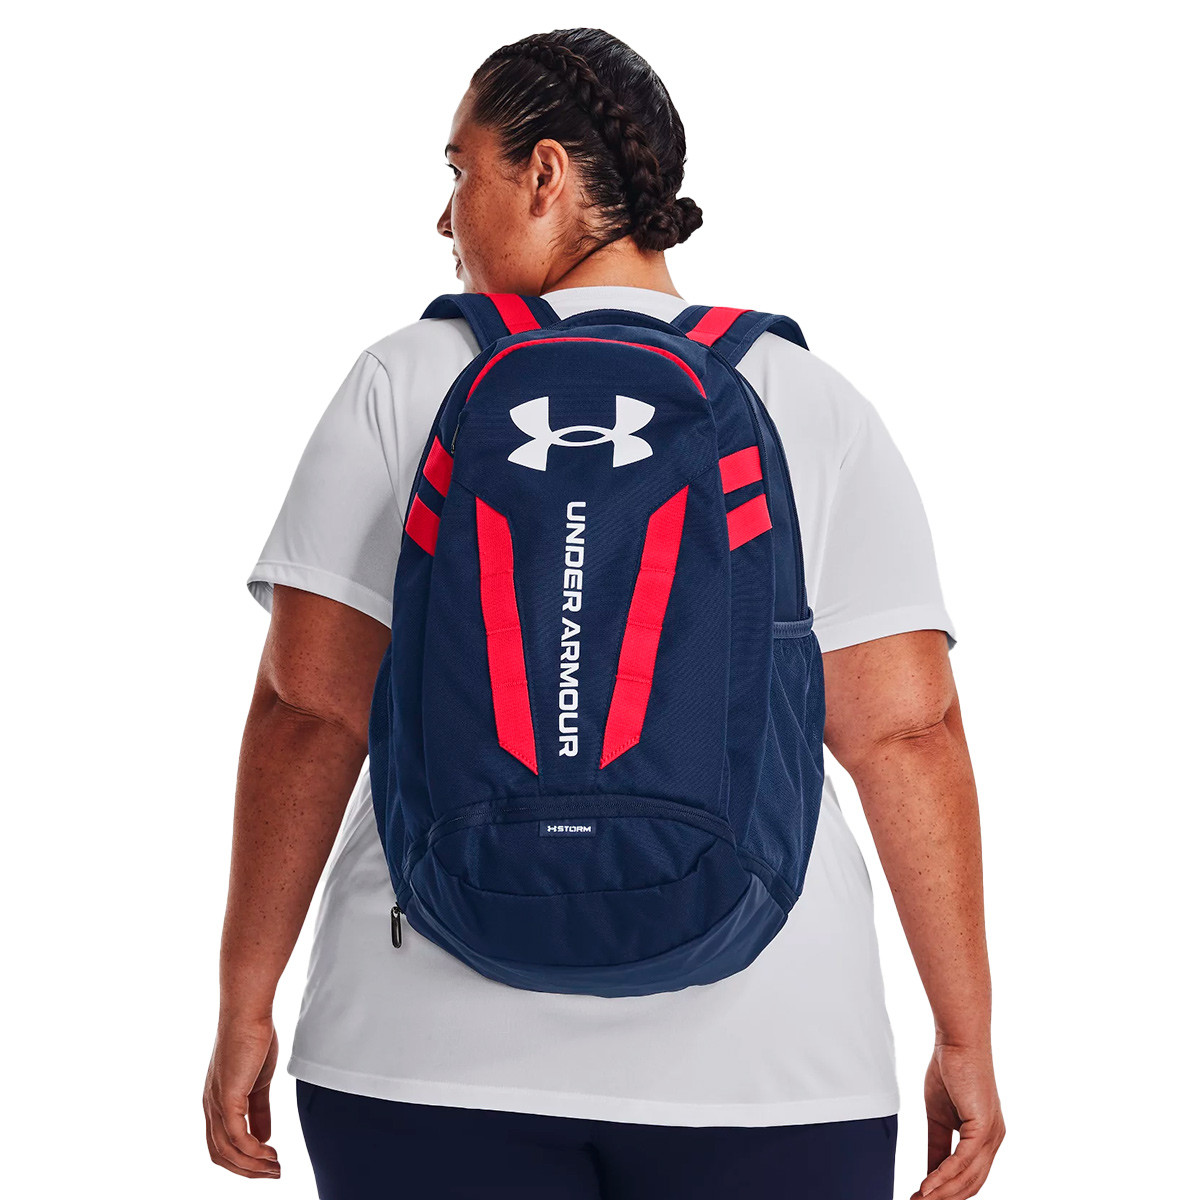  Under Armour Team Hustle 5.0 Backpack - Embroidered